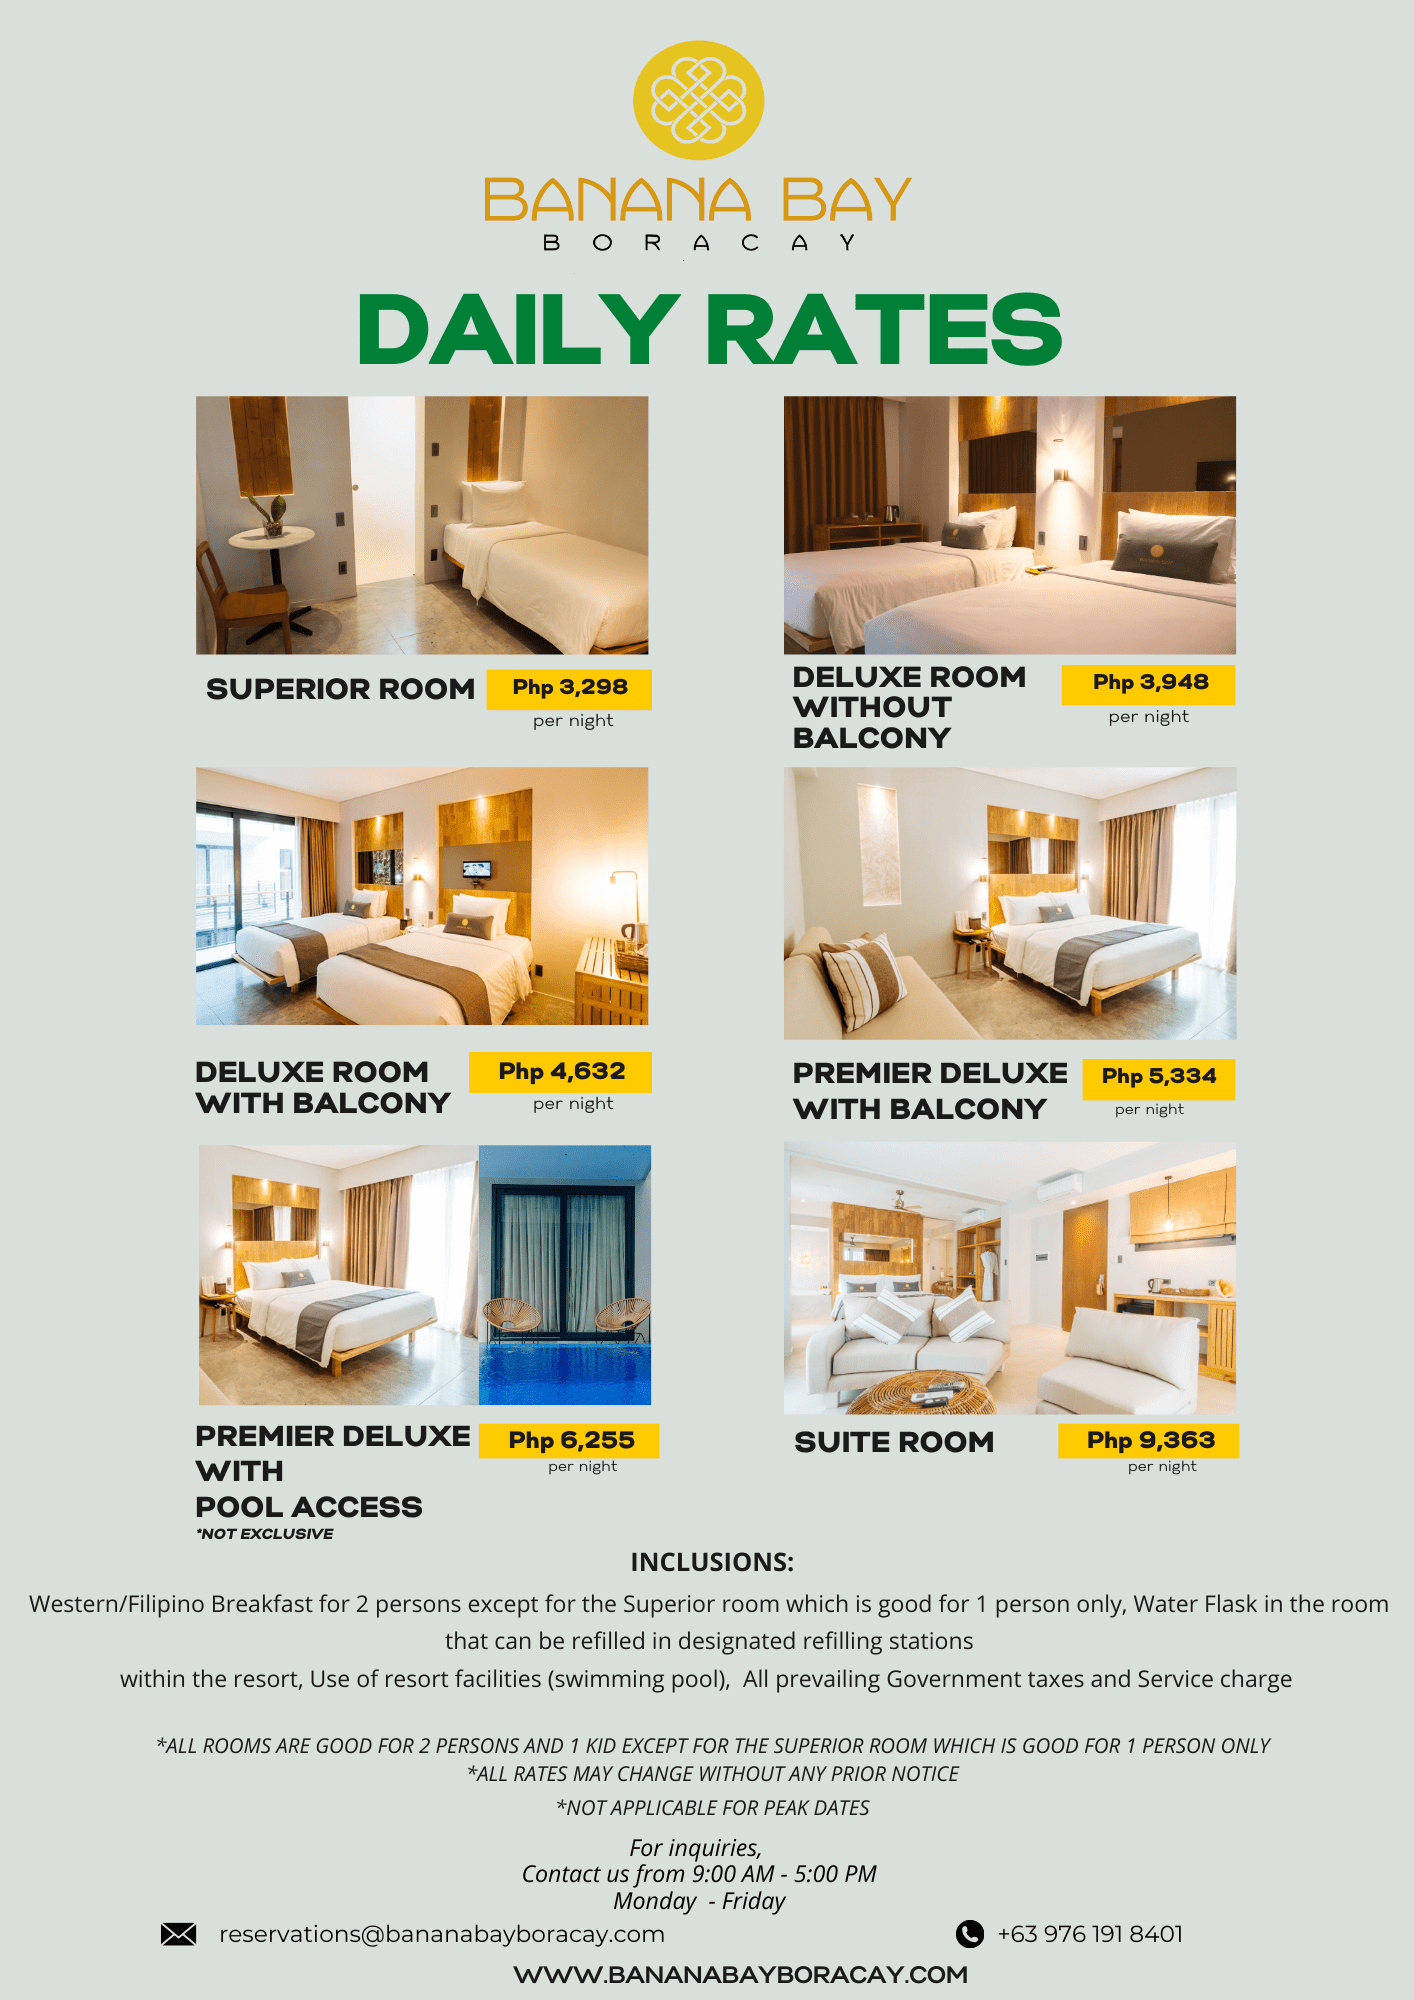 Daily Rates